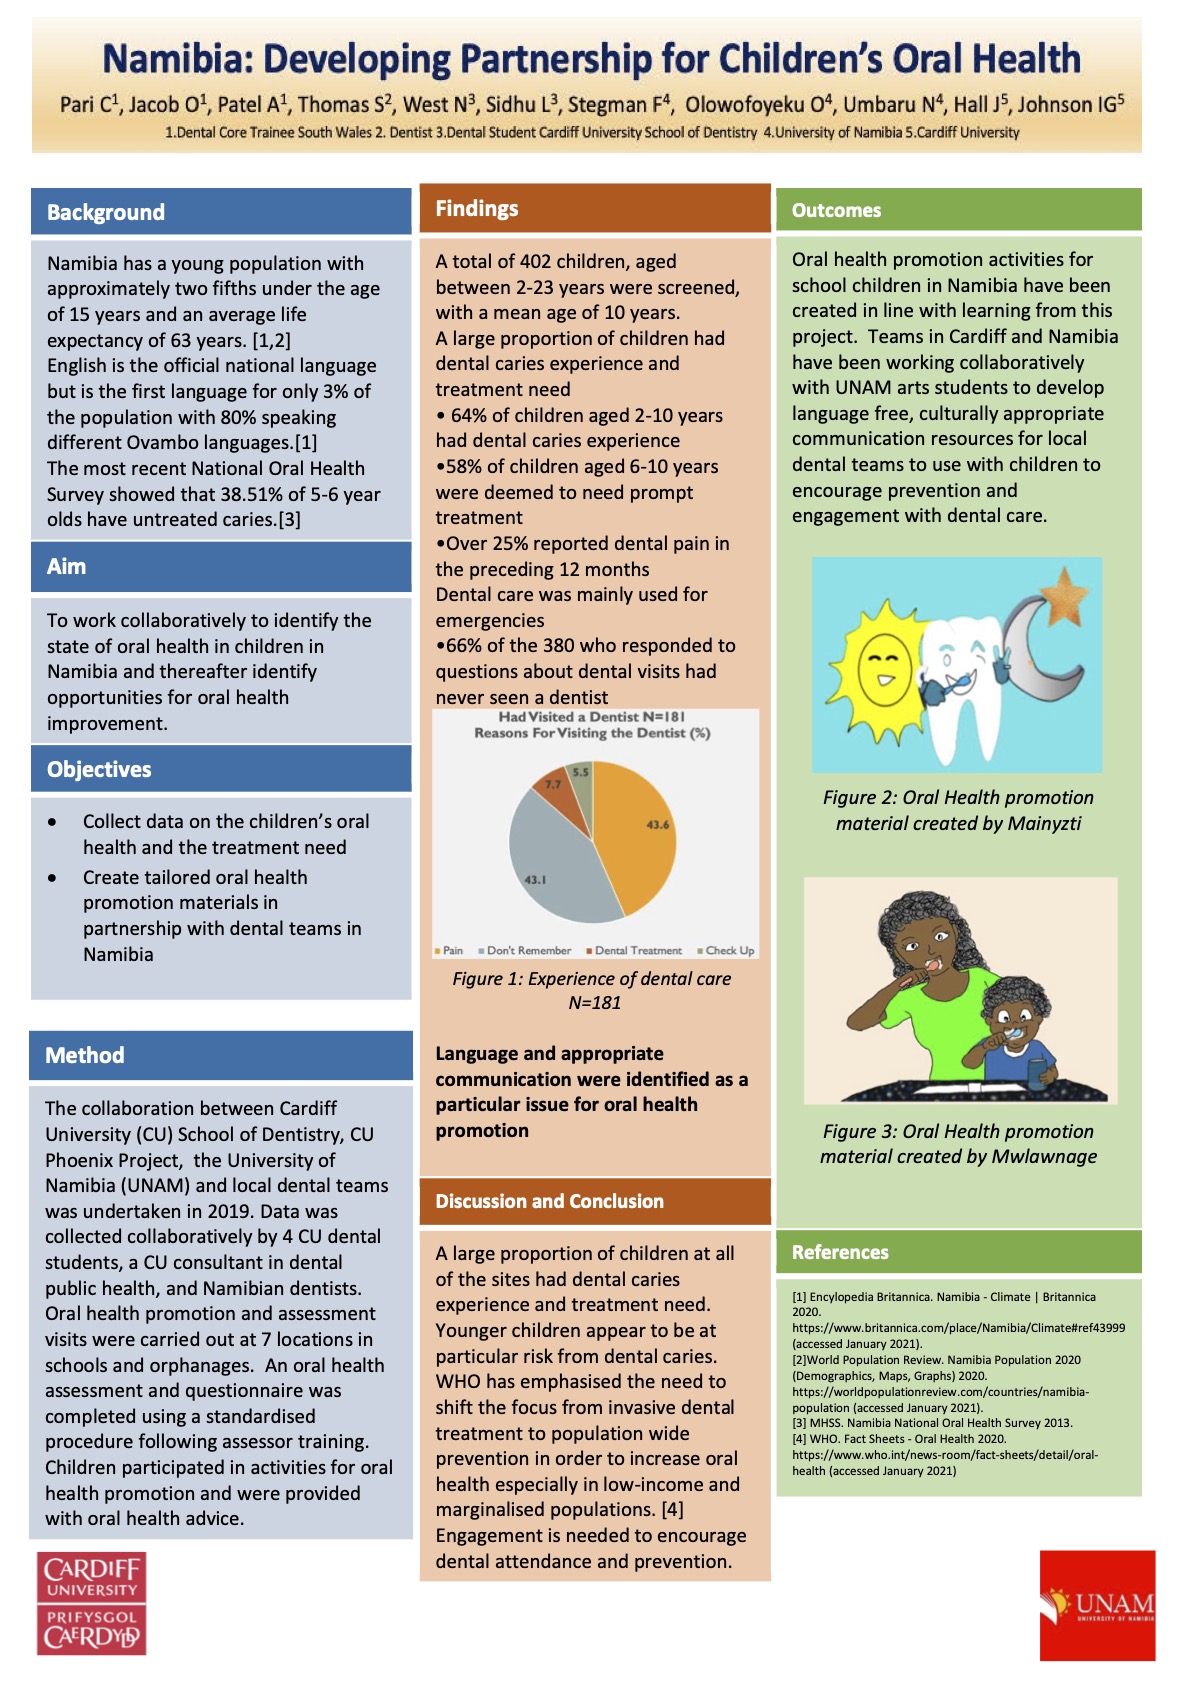 Poster Namibia: Developing Partnerships for Children’s Oral Health